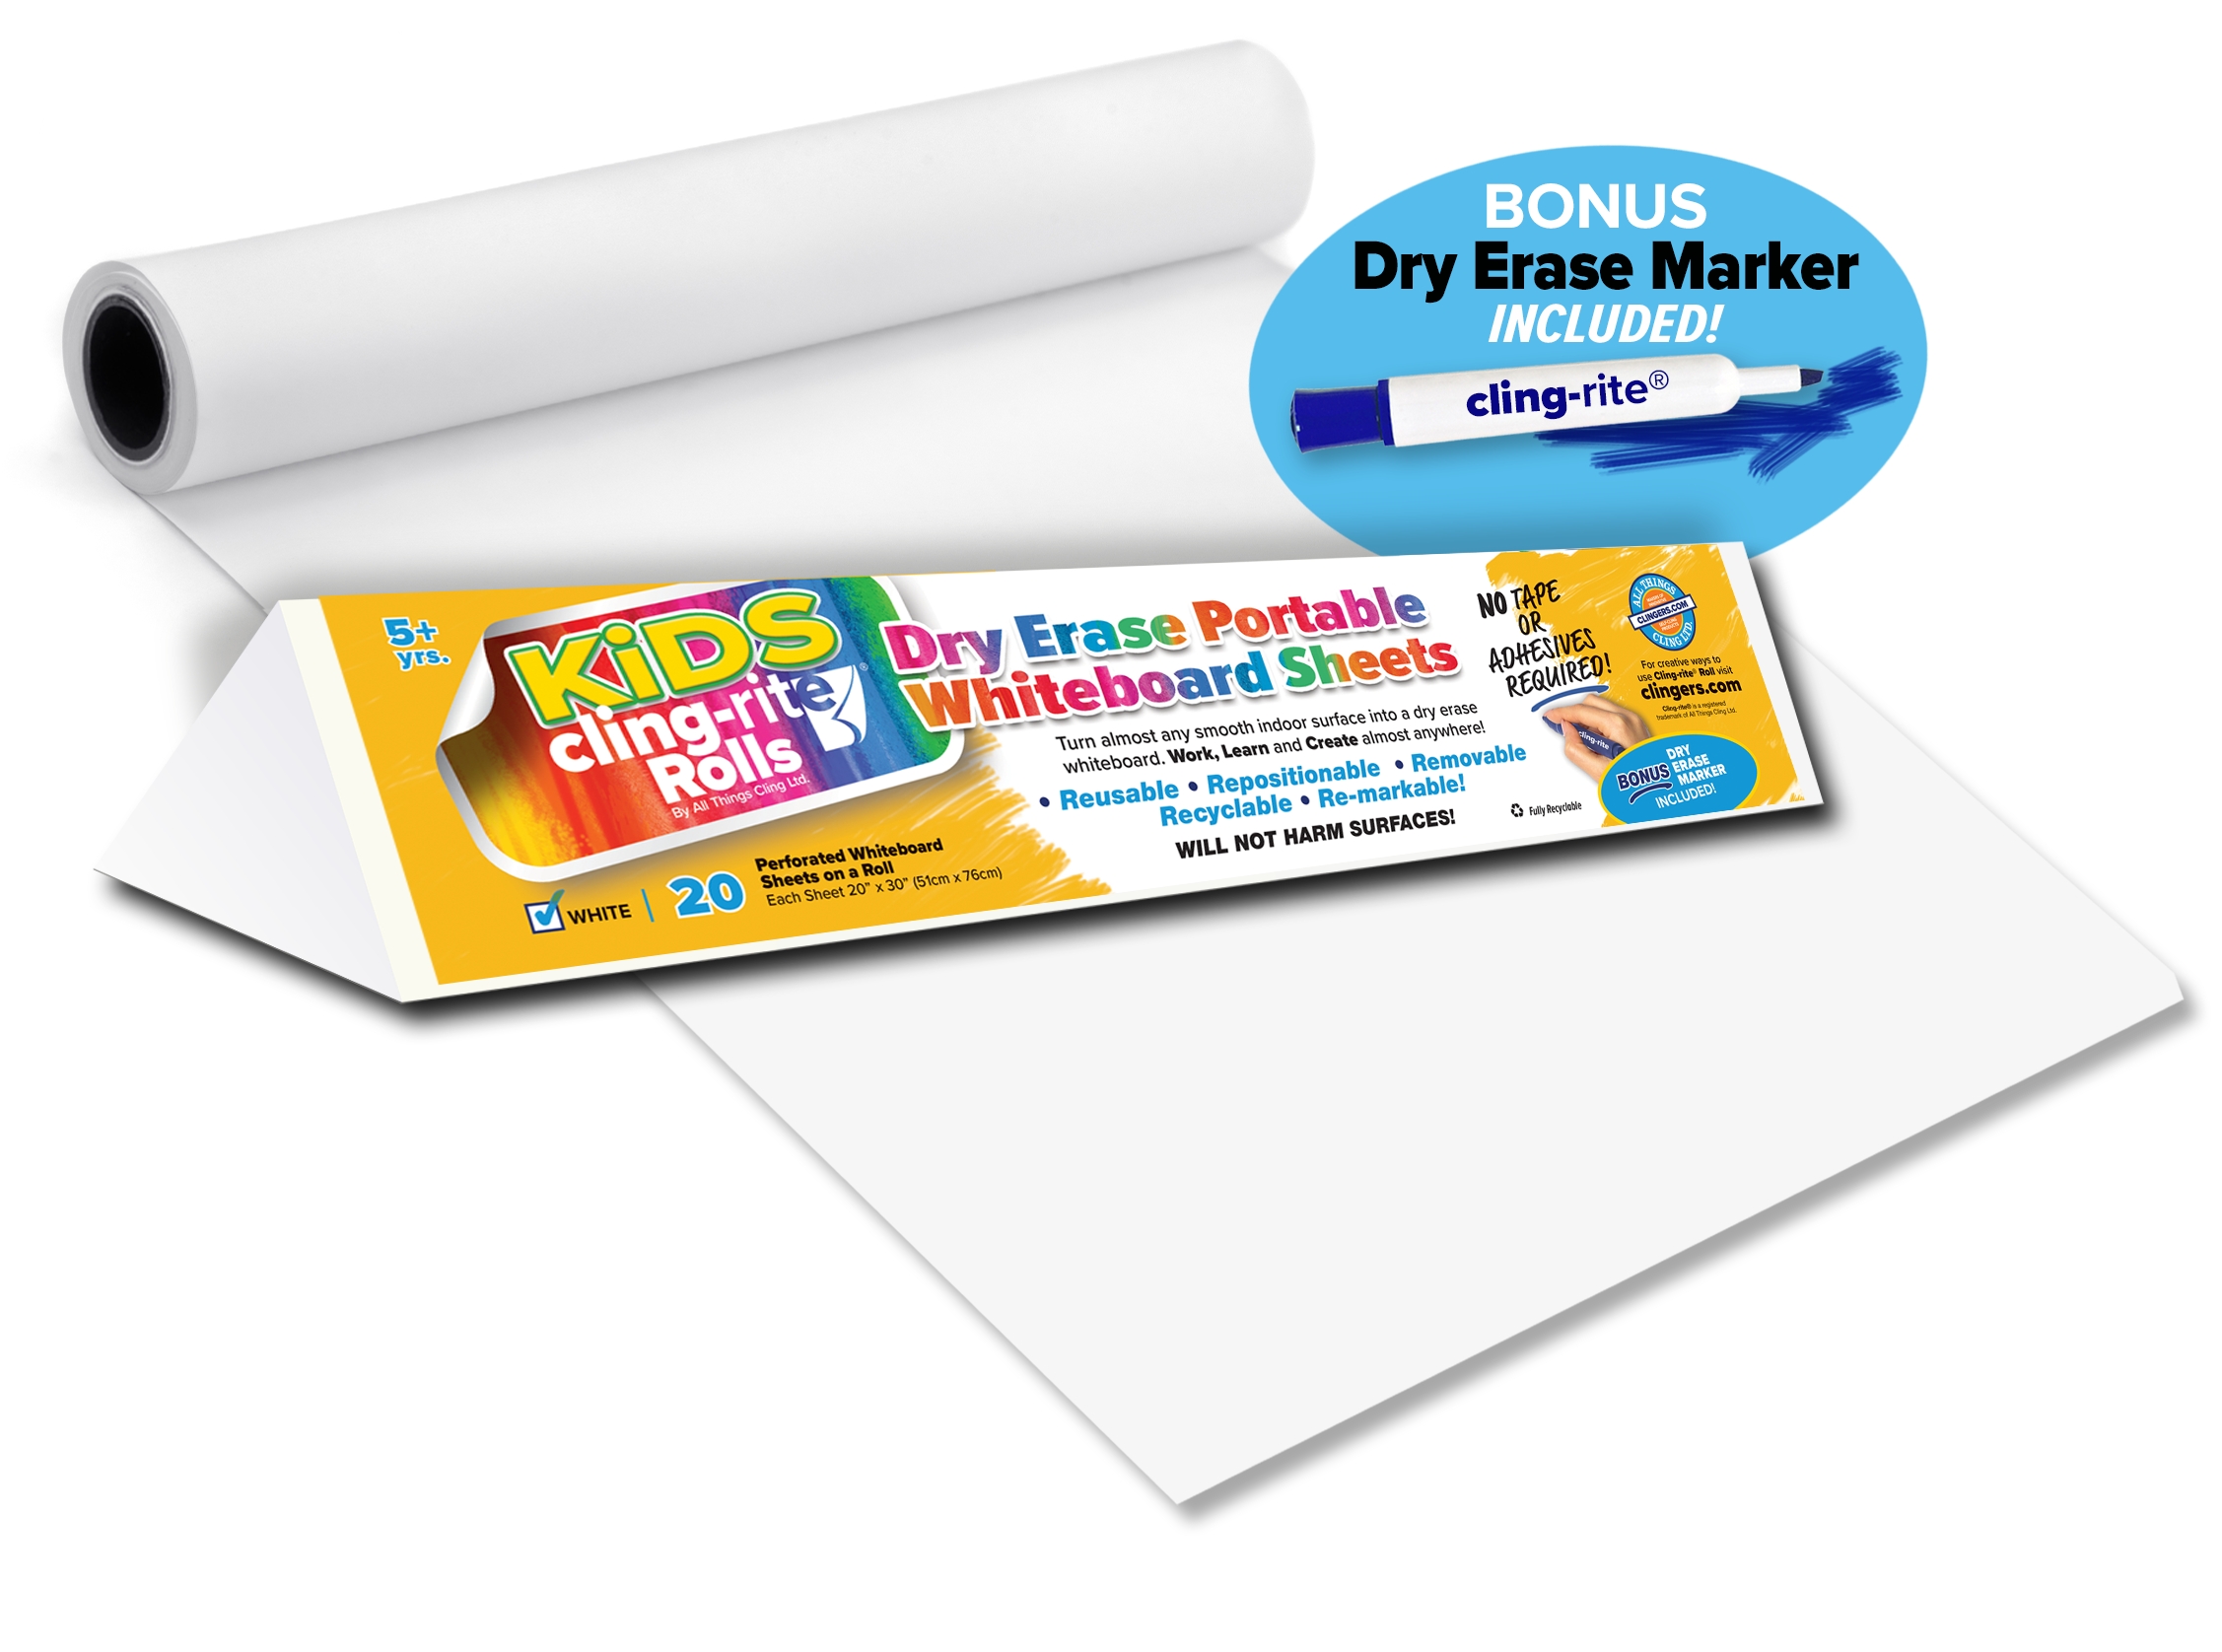 Basic Cling-rite® Roll - 20 sheets and dry erase marker included